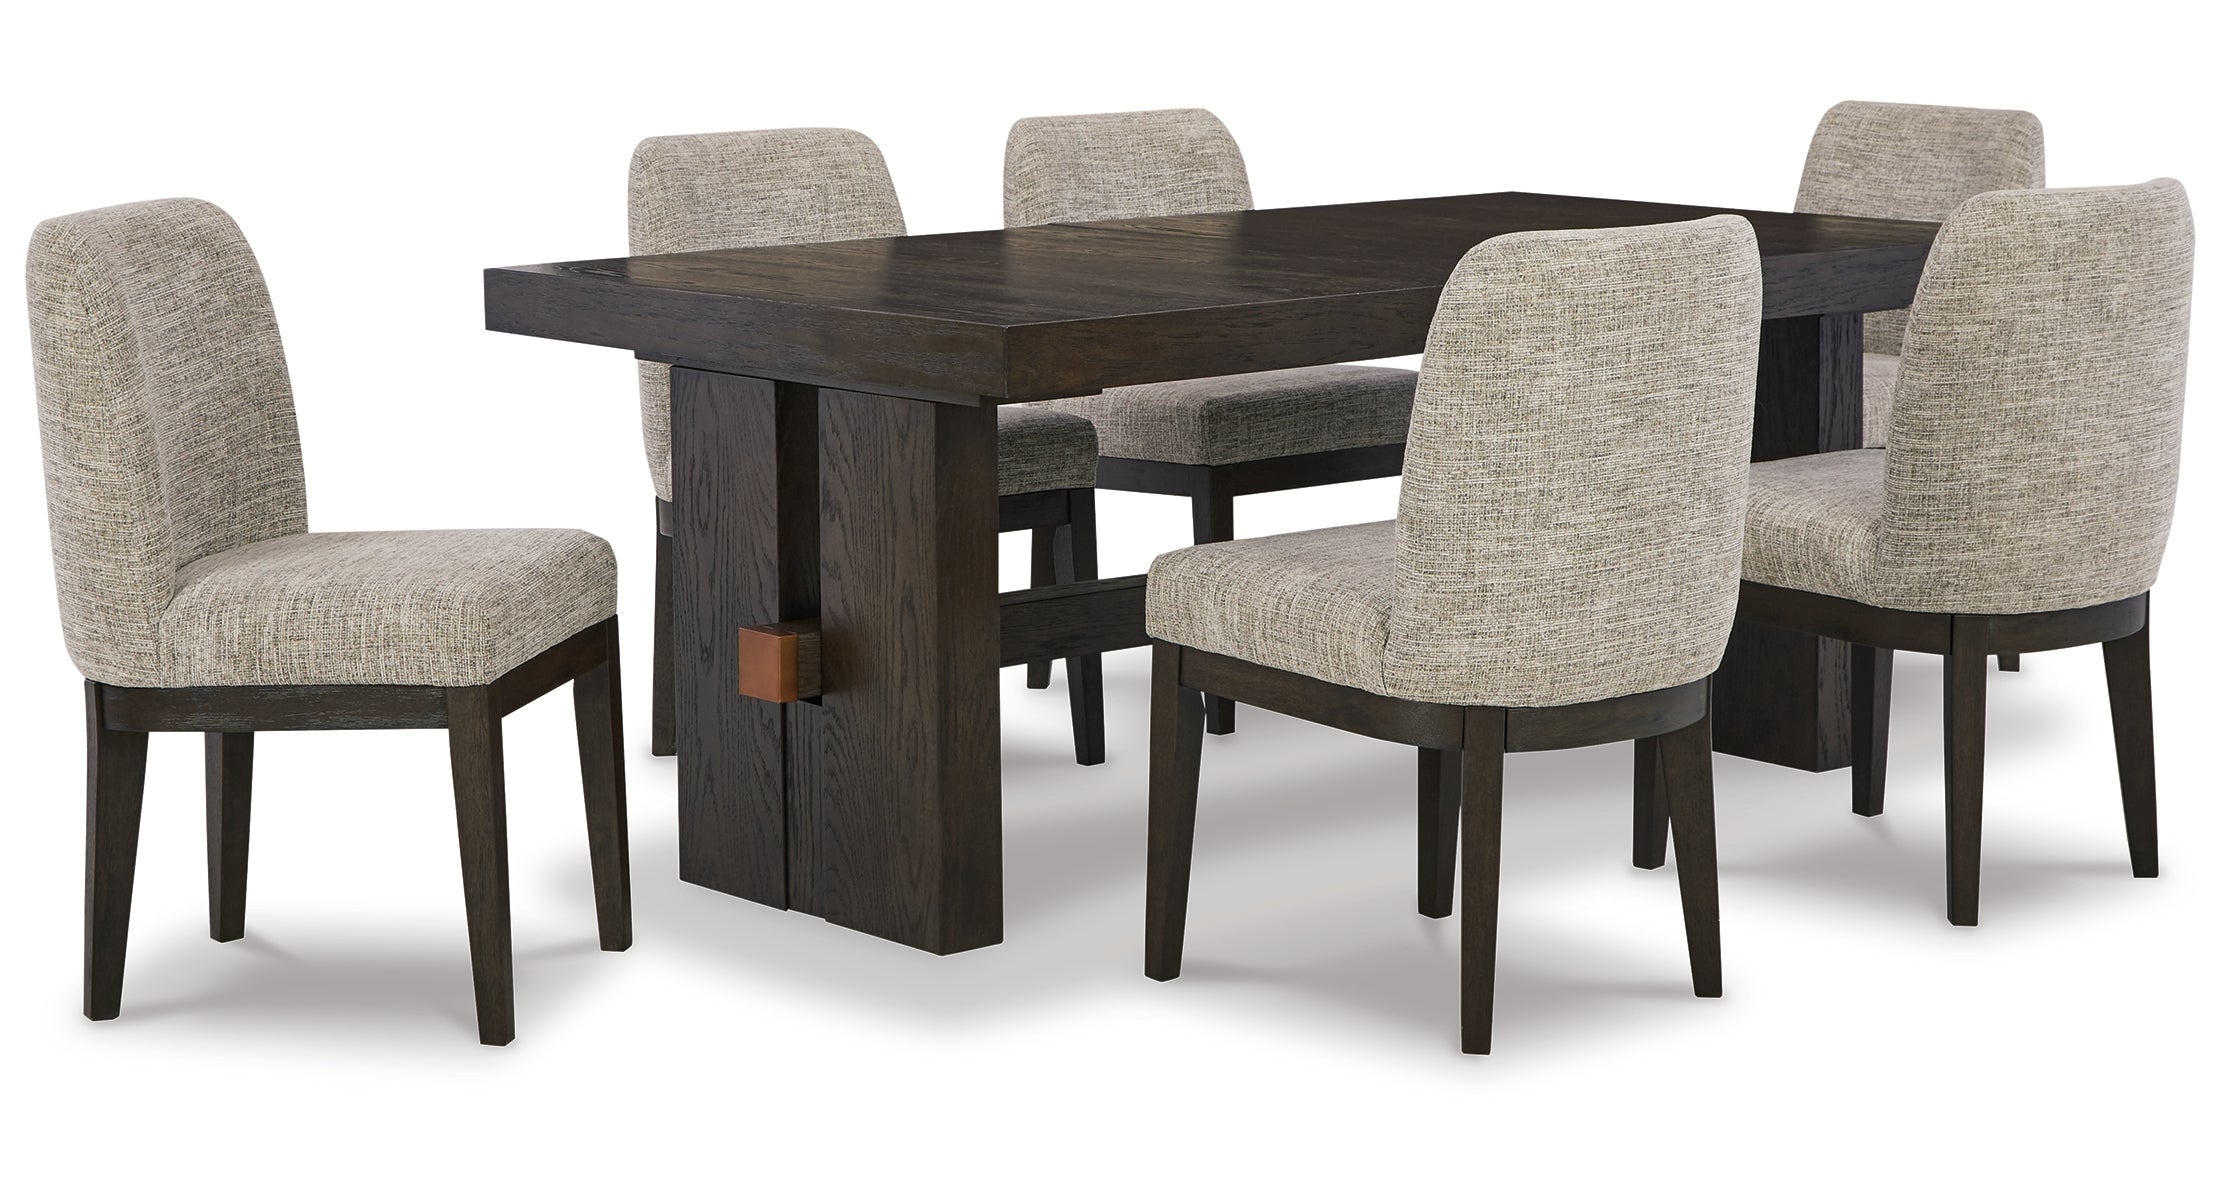 Burkhaus Dining Table and 6 Chairs